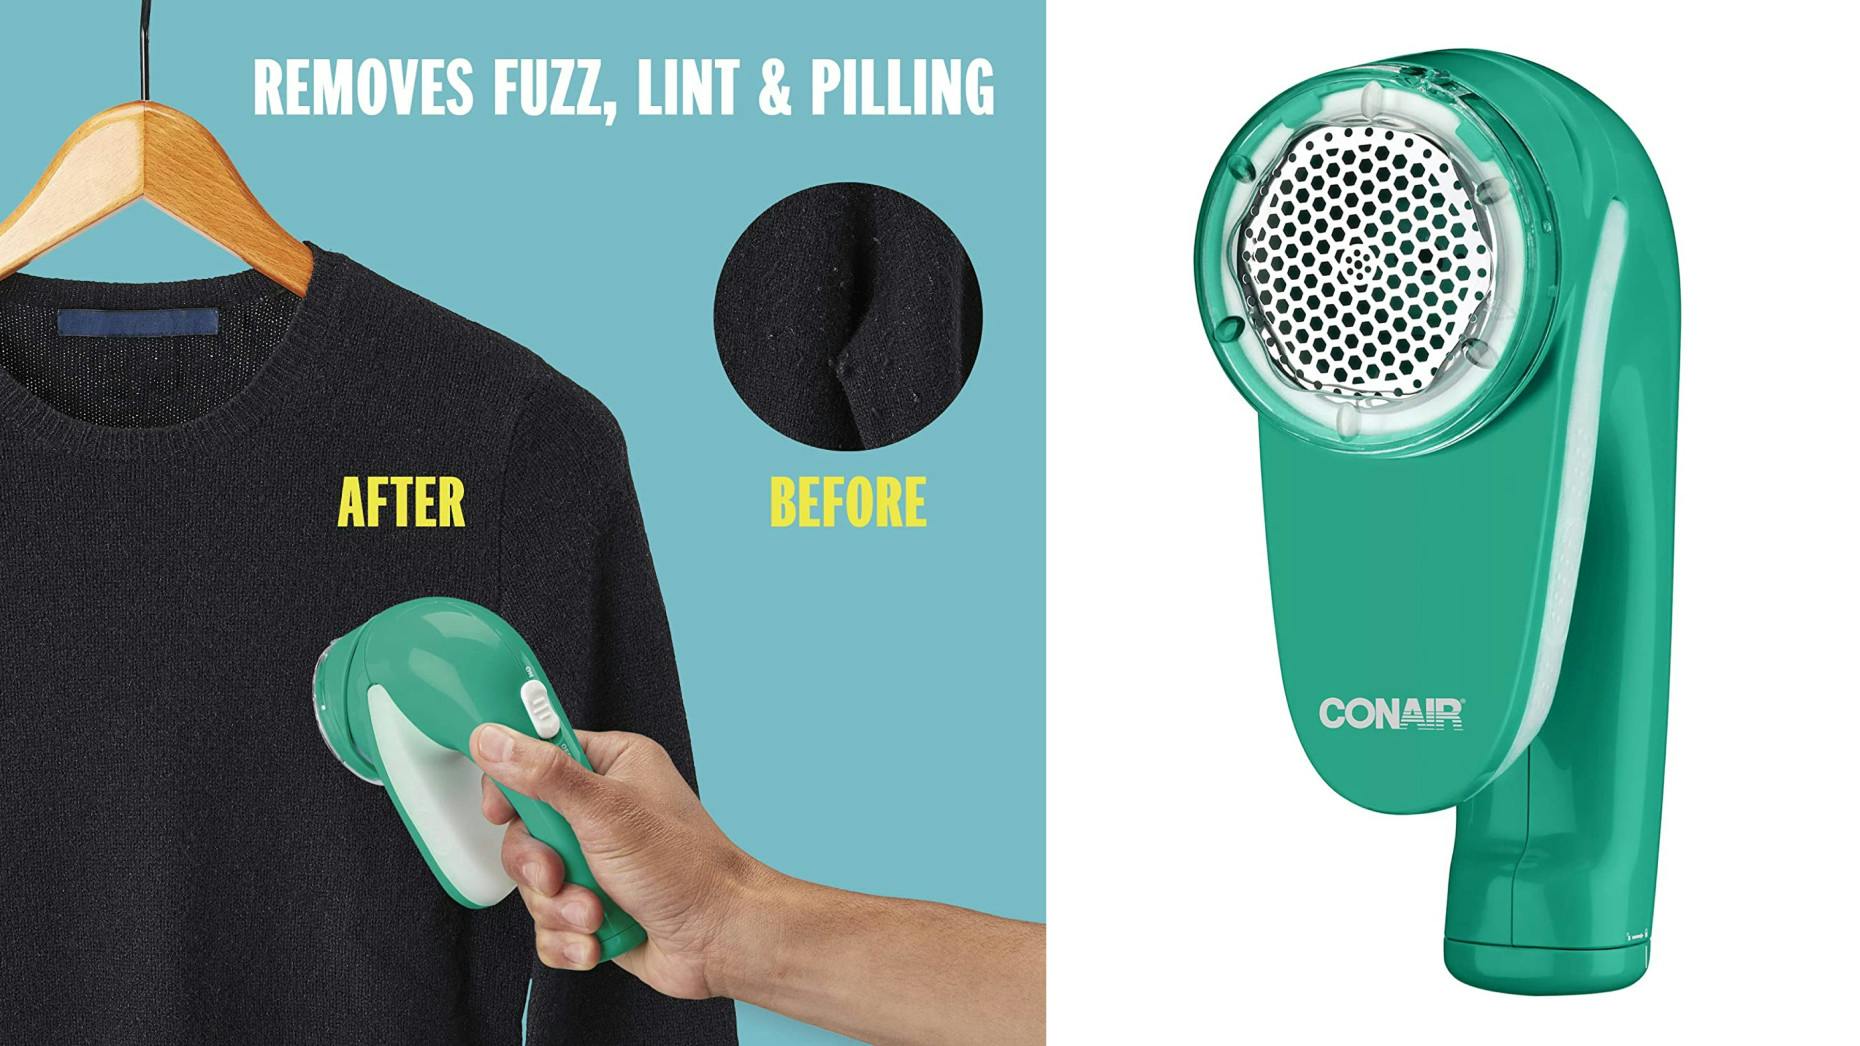 fabric shaver to rid clothes and blankets of pill balls